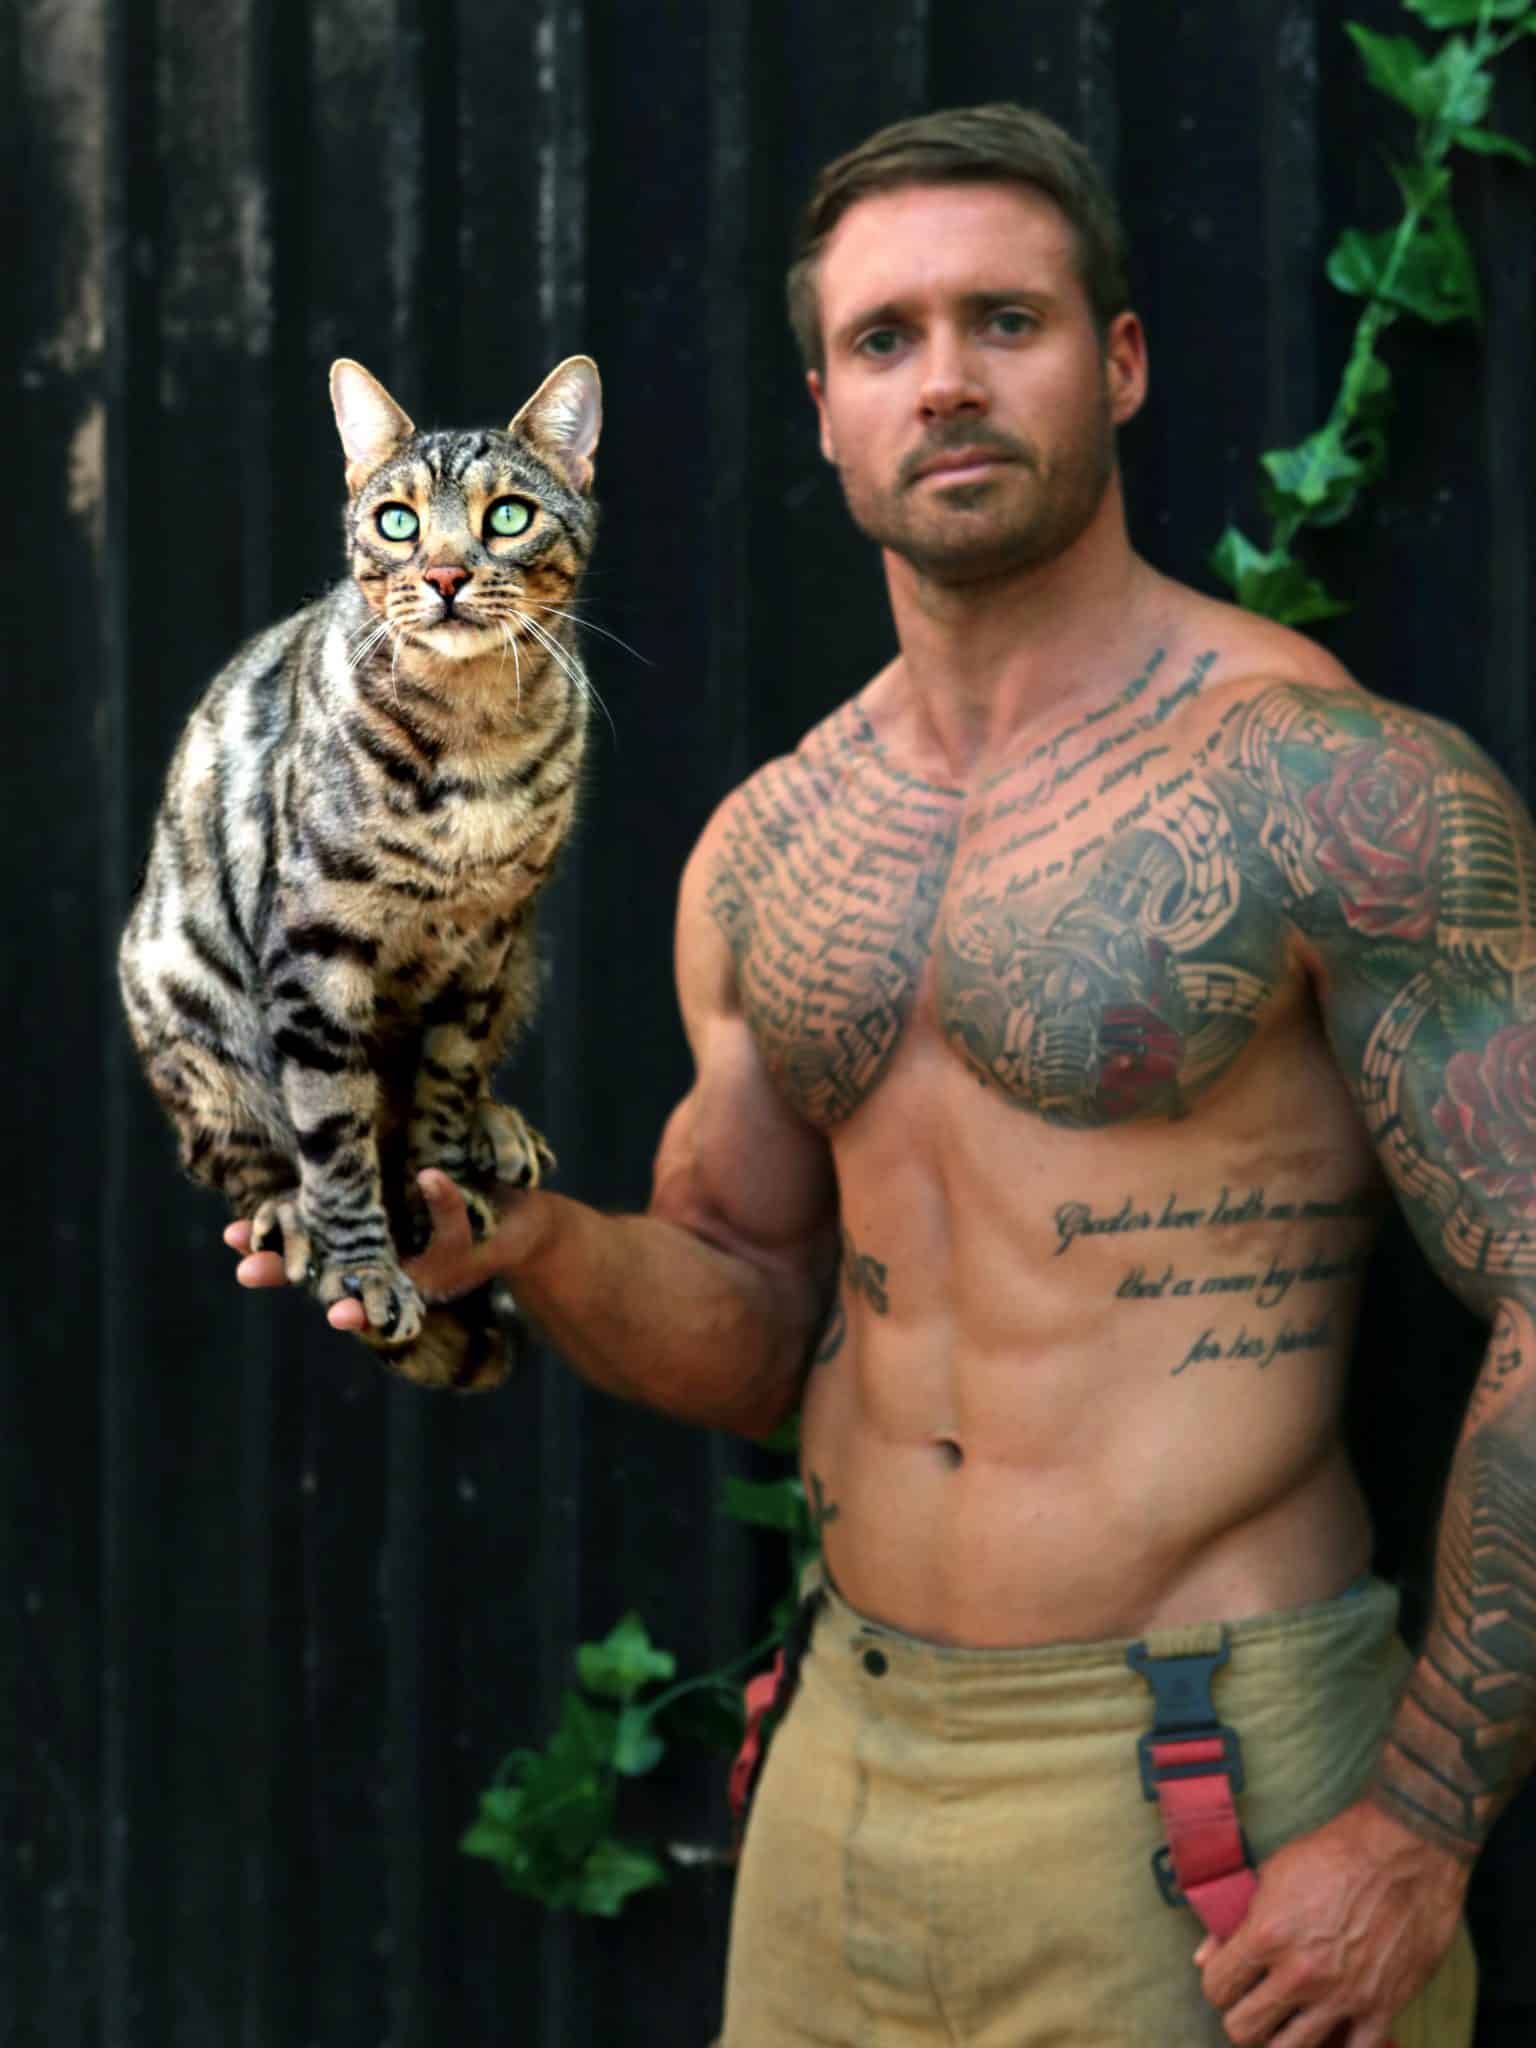 excited-for-2020-enough-to-pose-shirtless-with-cats-for-an-annual-charity-calendar-like-these